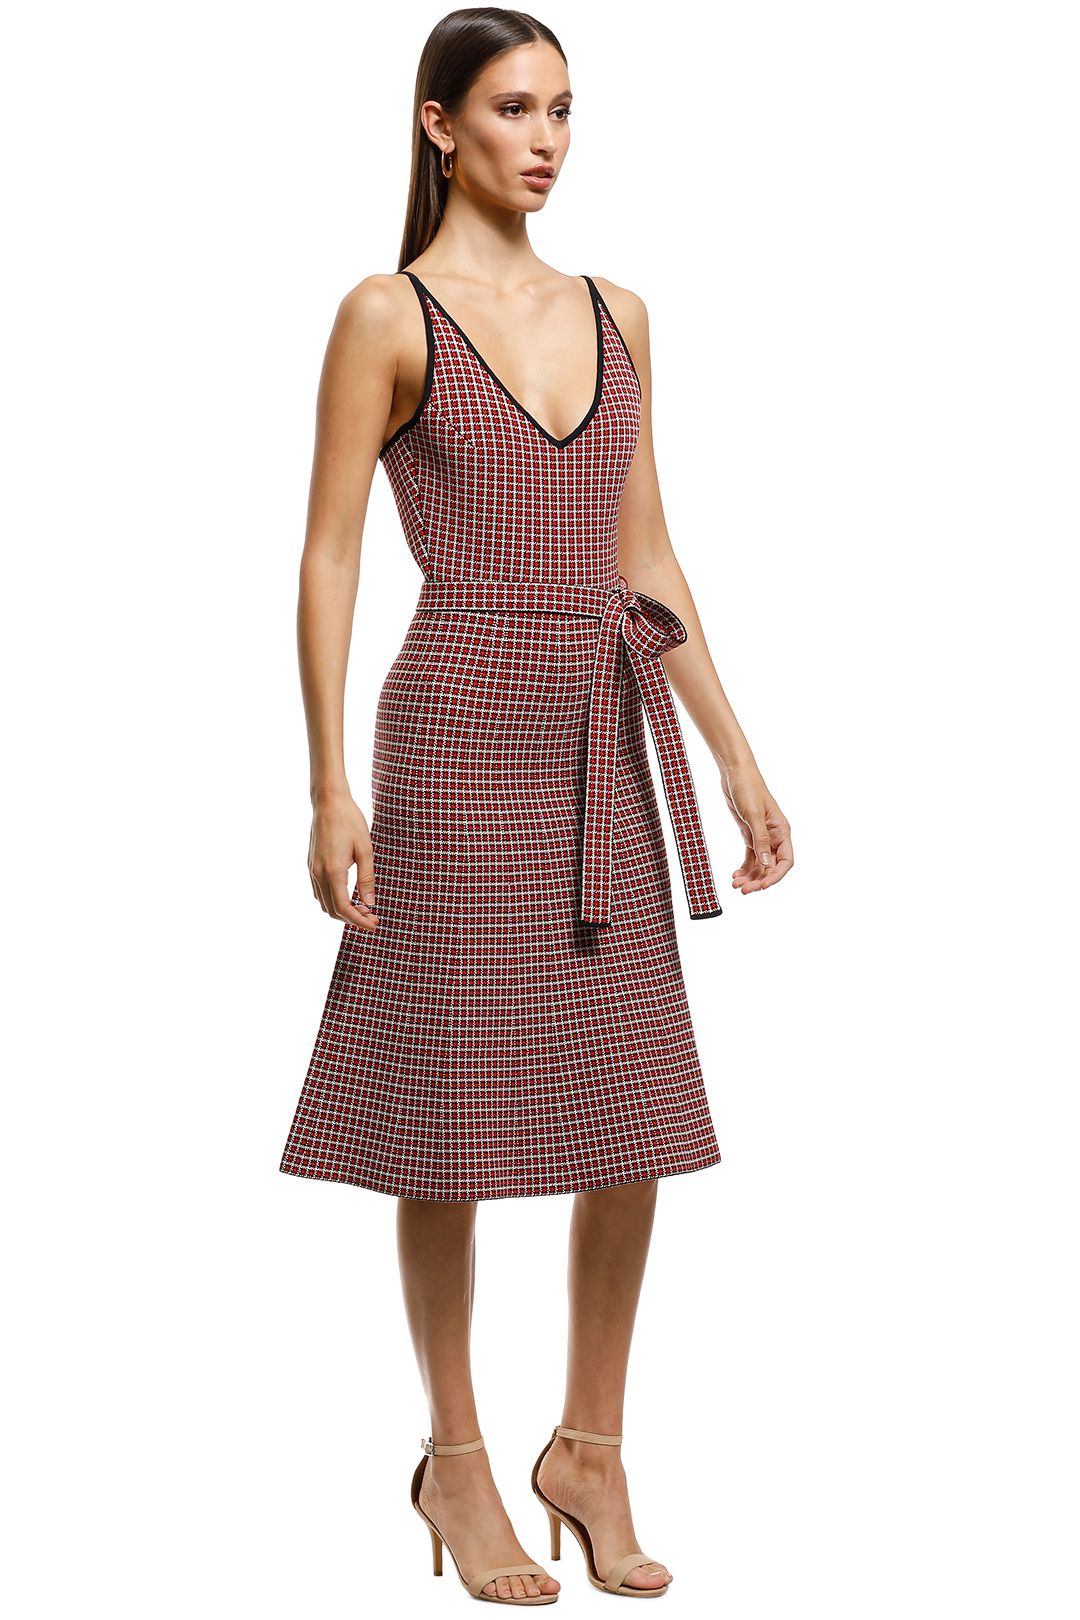 Scanlan Theodore - Crepe Knit Plaid Dress - Red - Side